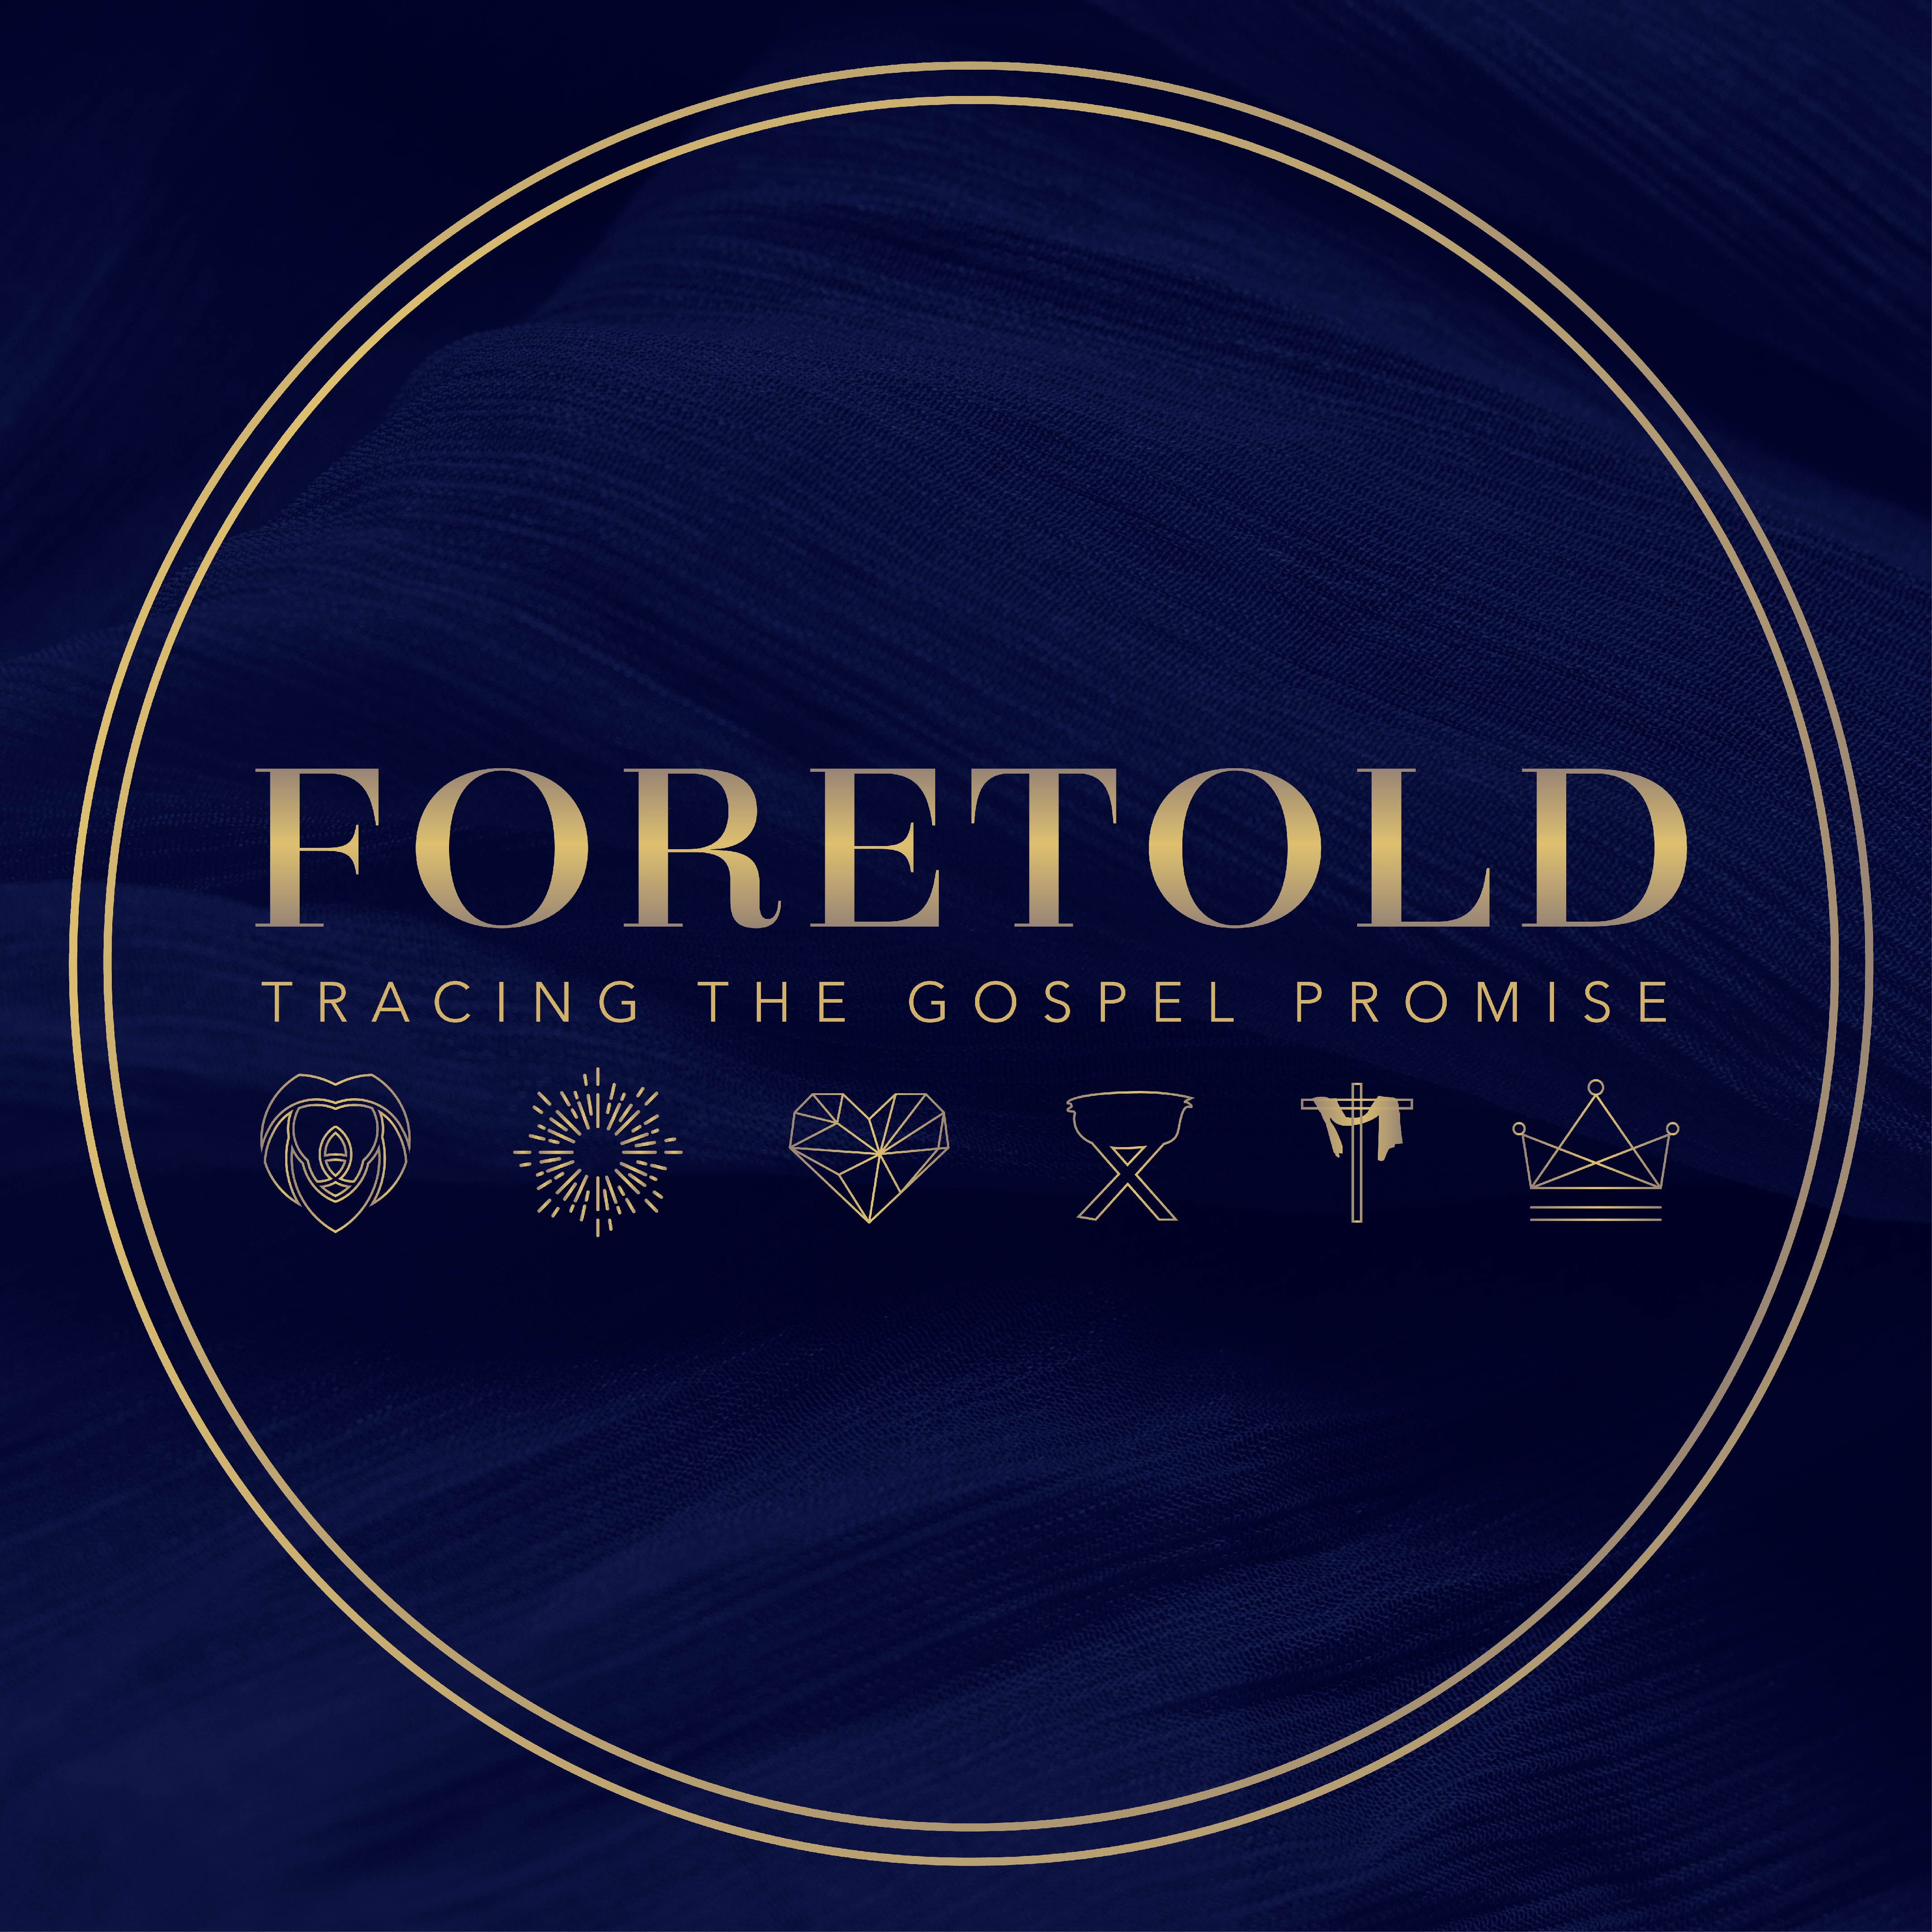 Foretold - Advent